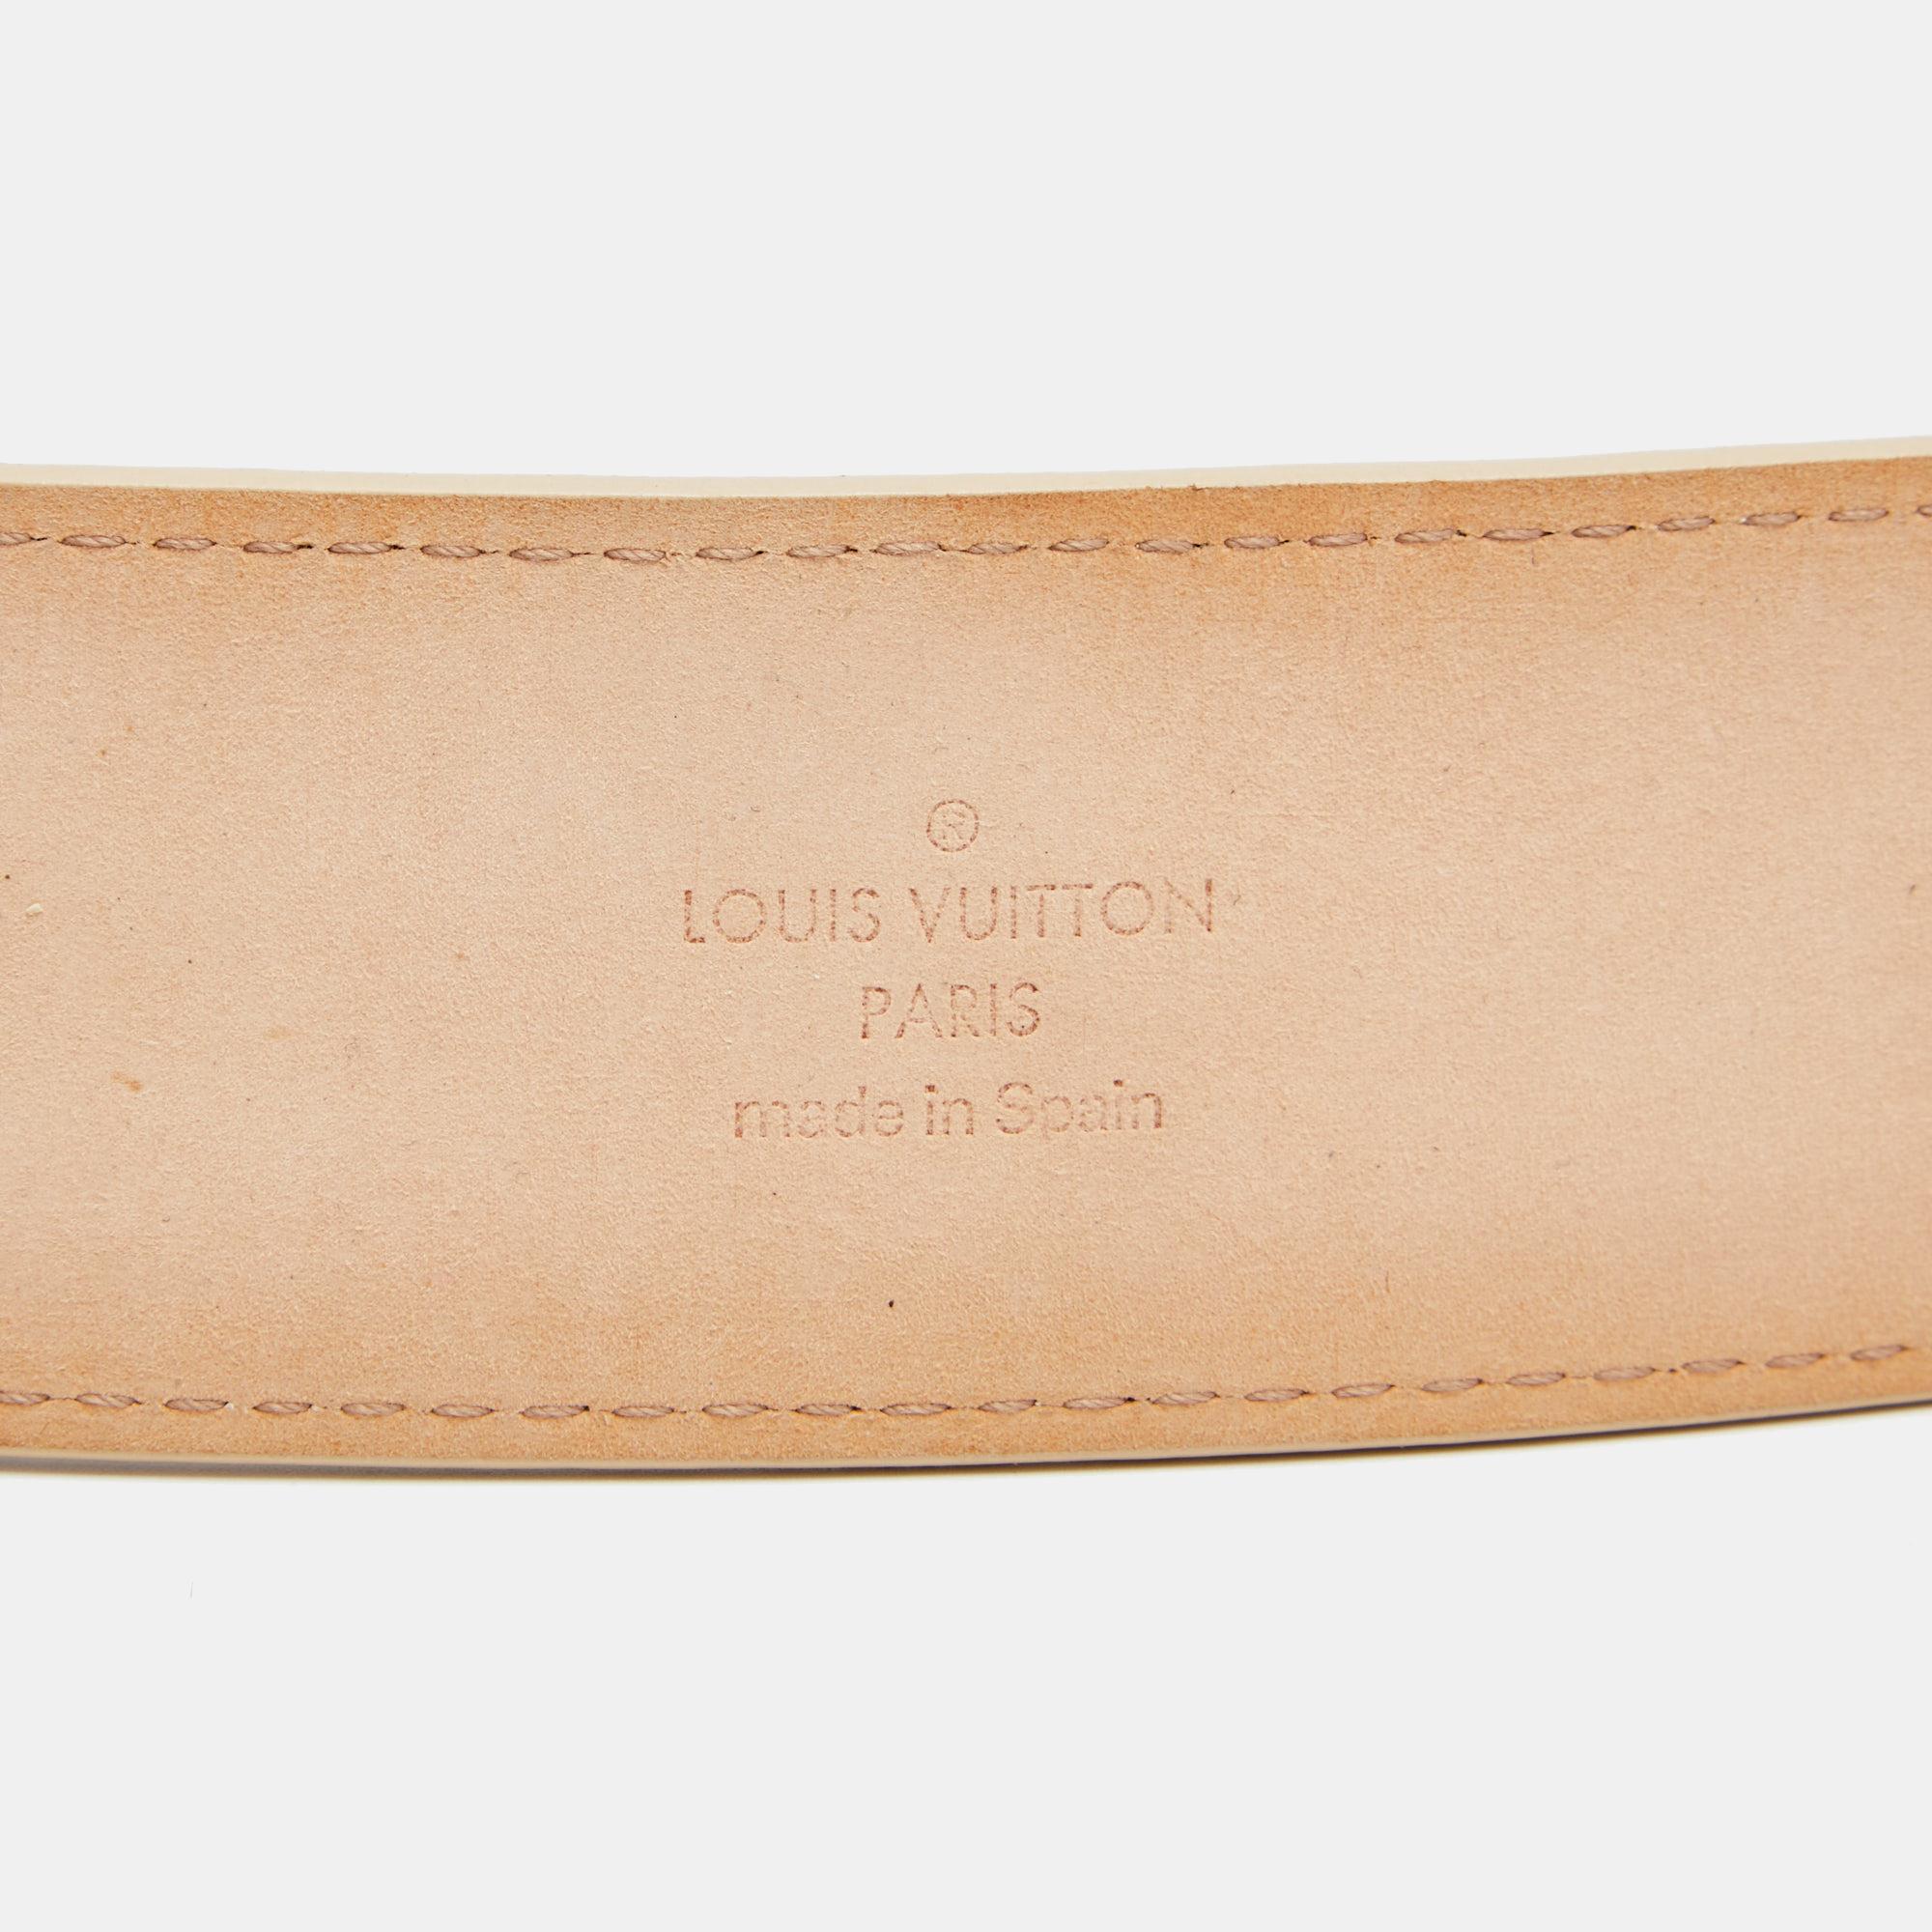 This Initiales belt from Louis Vuitton is simple in design but nevertheless quite appealing. The signature Damier Azur canvas belt flaunts a smooth construction with neat stitches and has a gold-tone buckle in the form of an enlarged LV symbol. The